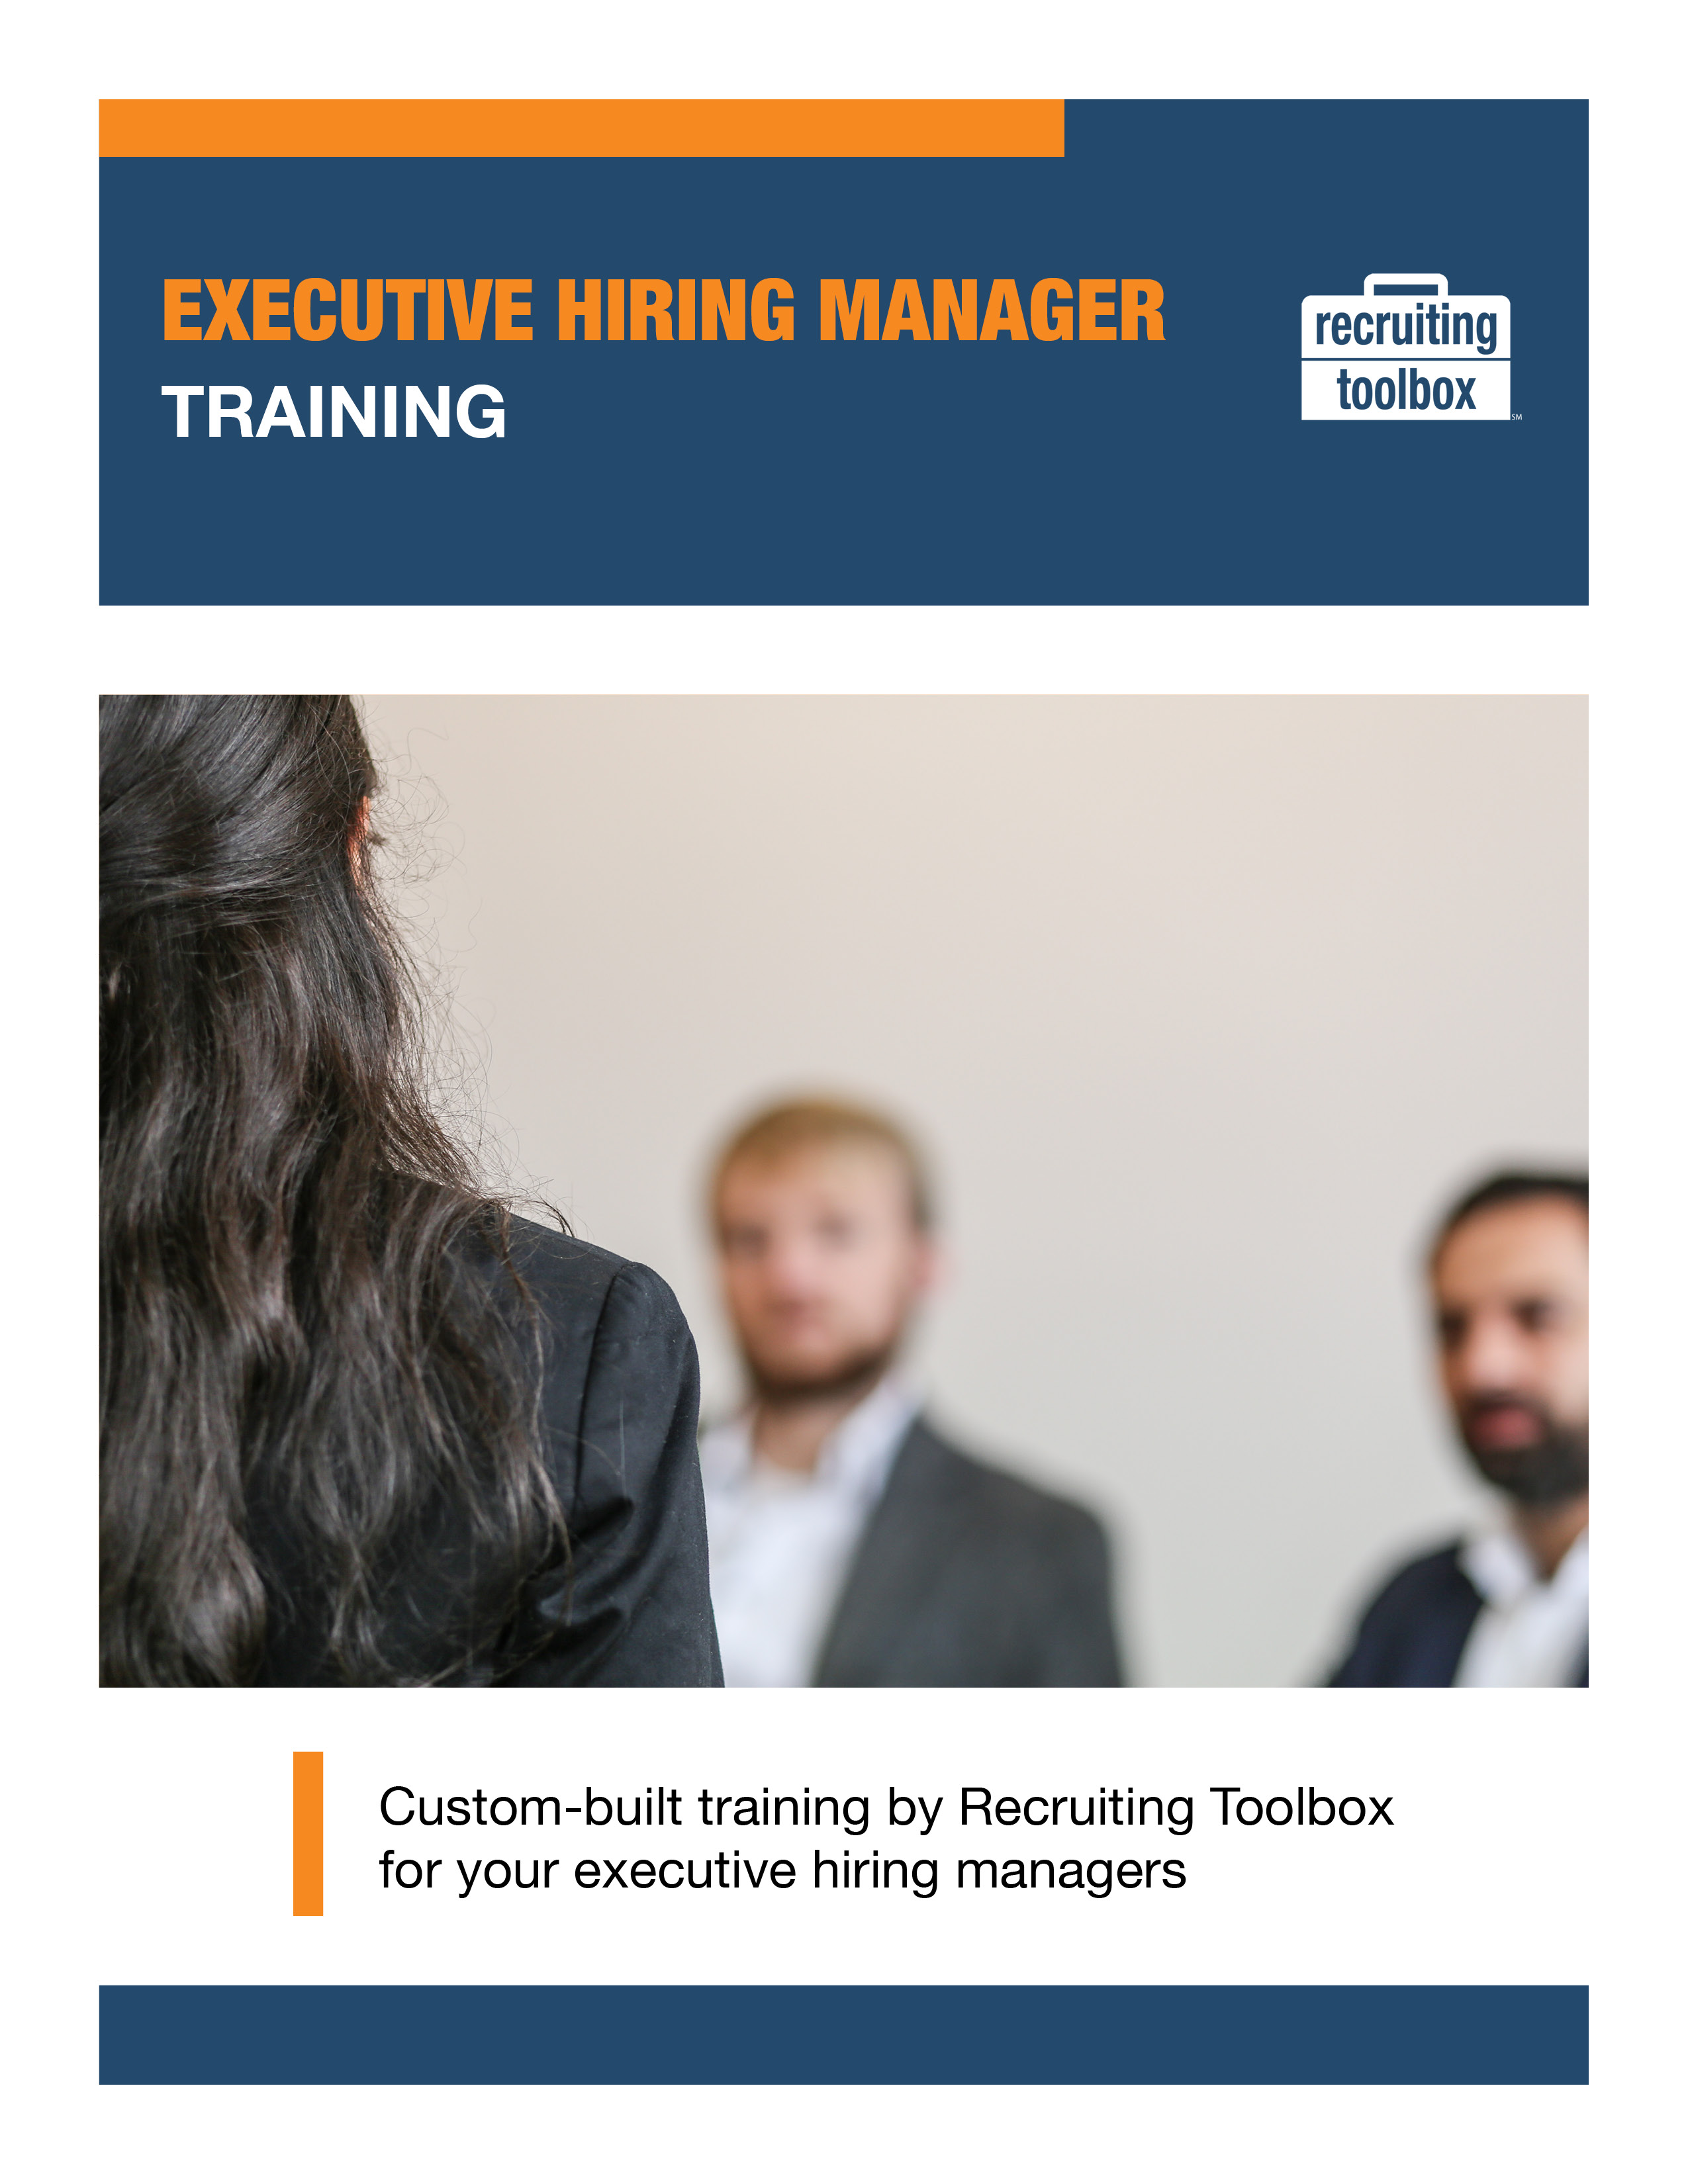 Executive Hiring Manager Training Overview